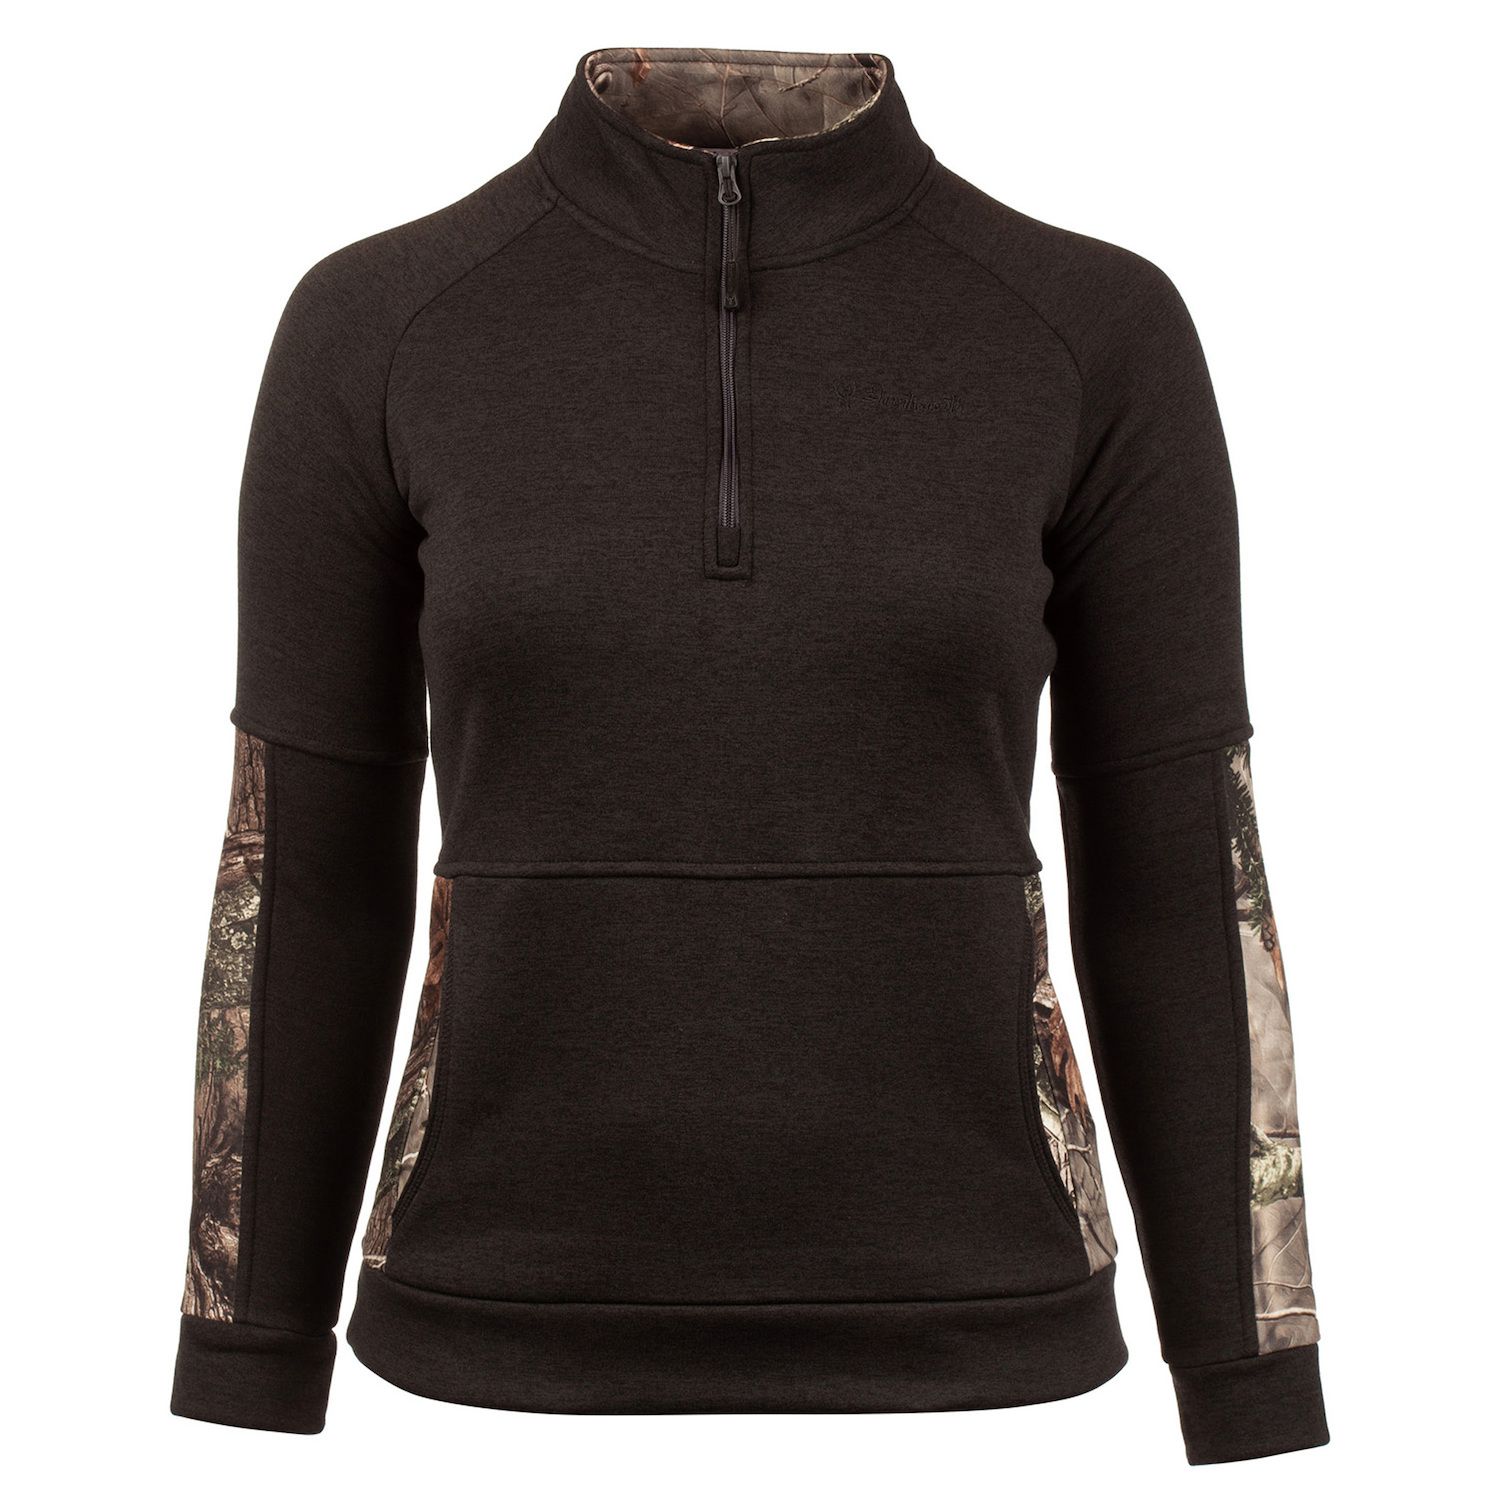 Image for Huntworth Women's Heather Gray Knit Quarter-Zip Pullover at Kohl's.